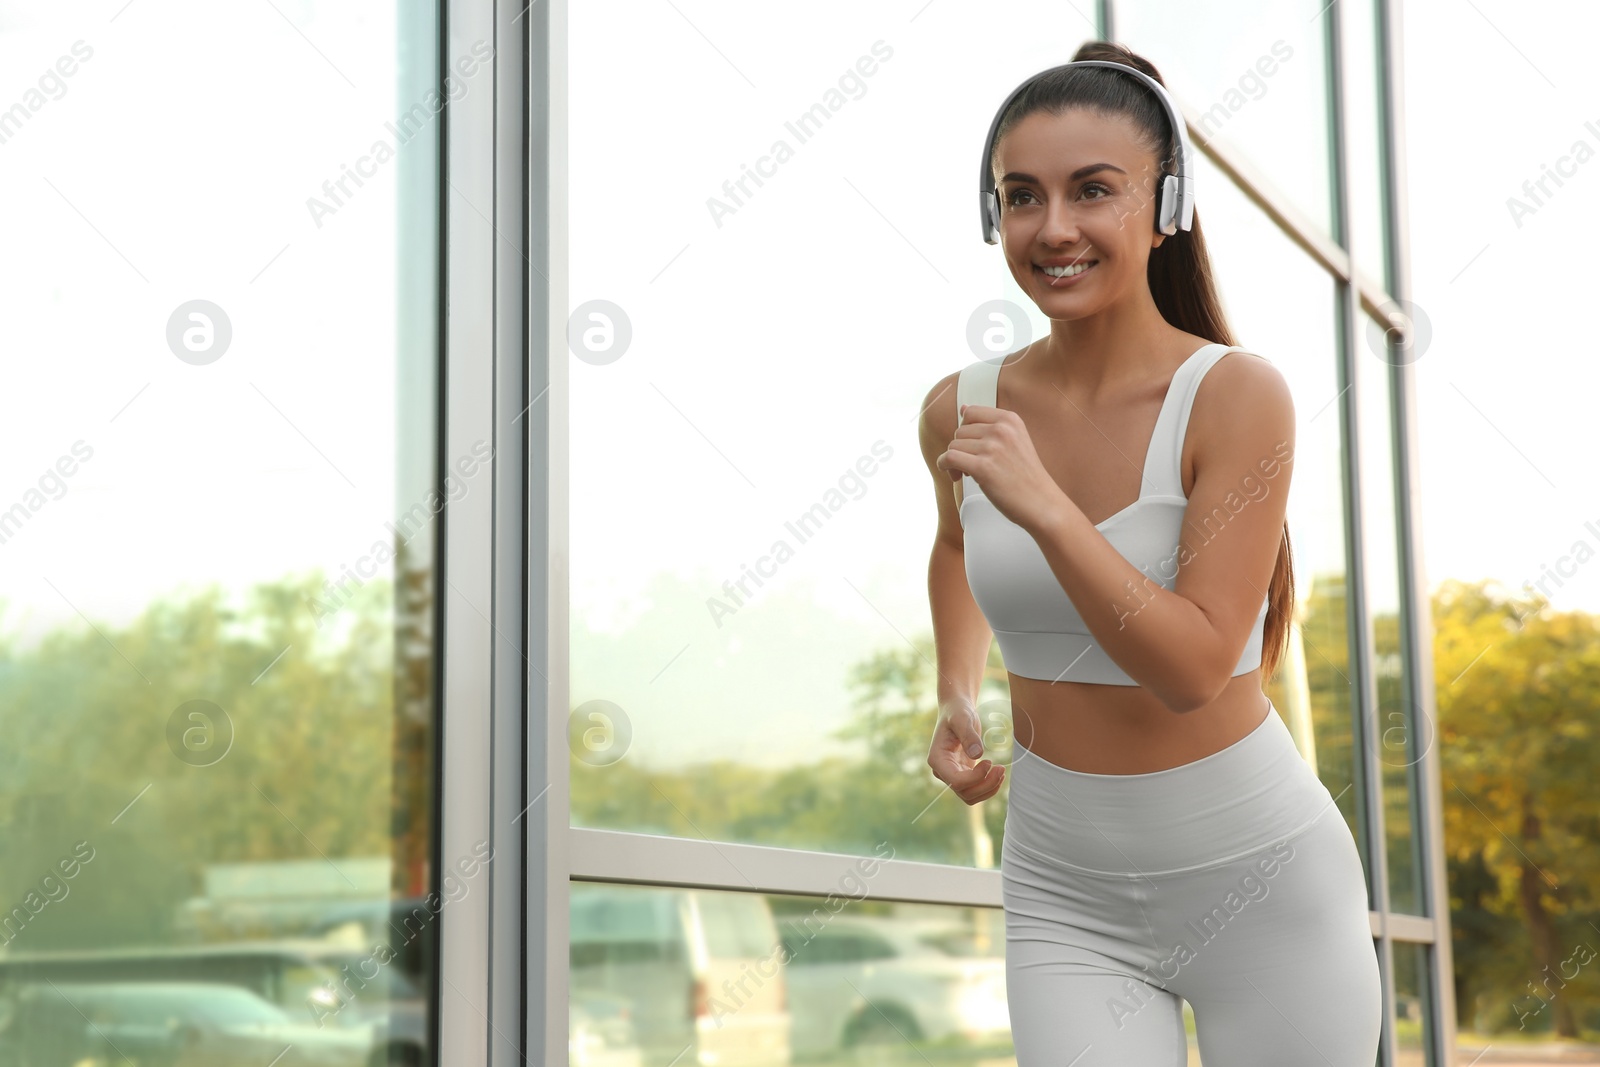 Photo of Young woman in sportswear with headphones running outdoors. Space for text